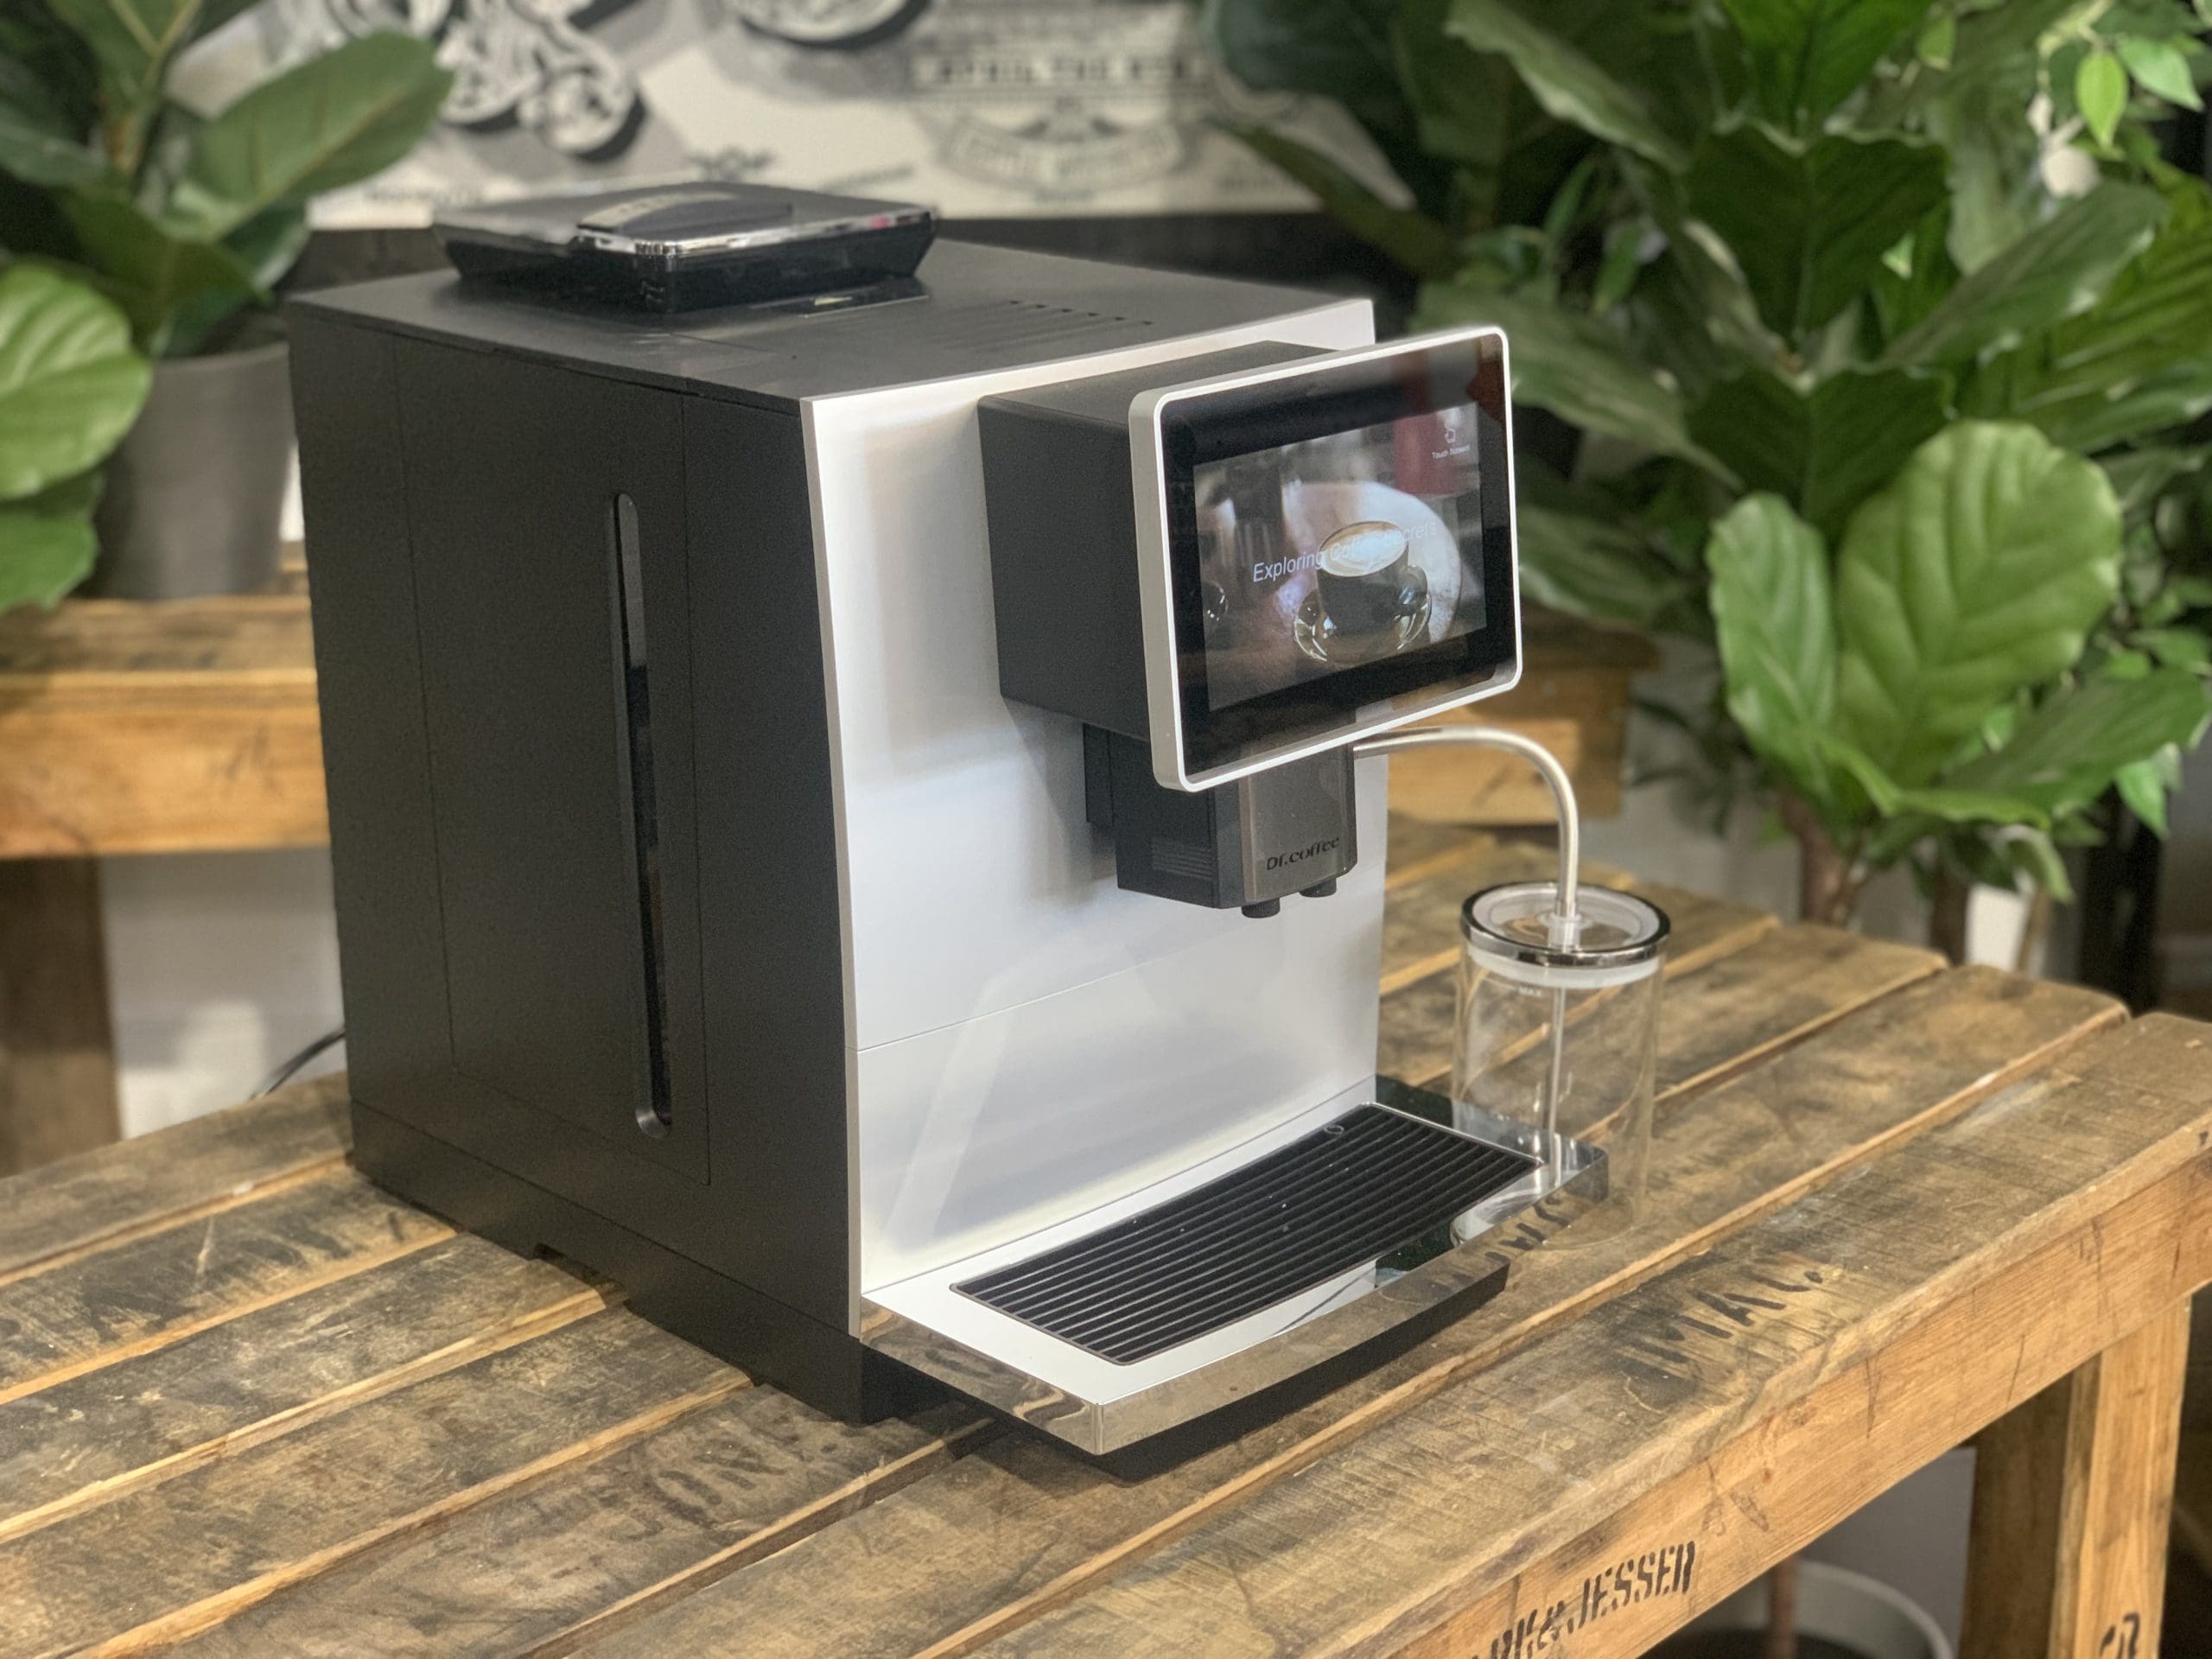 https://coffeemachinewarehouse.com.au/wp-content/uploads/2022/02/Dr-Coffee-H10-Fully-Automatic-Brand-New-Espresso-Coffee-Grinder-Coffee-Machine-Warehouse-1858-Princes-Highway-Clayton-VIC-3168IMG_5845-scaled-1.jpg